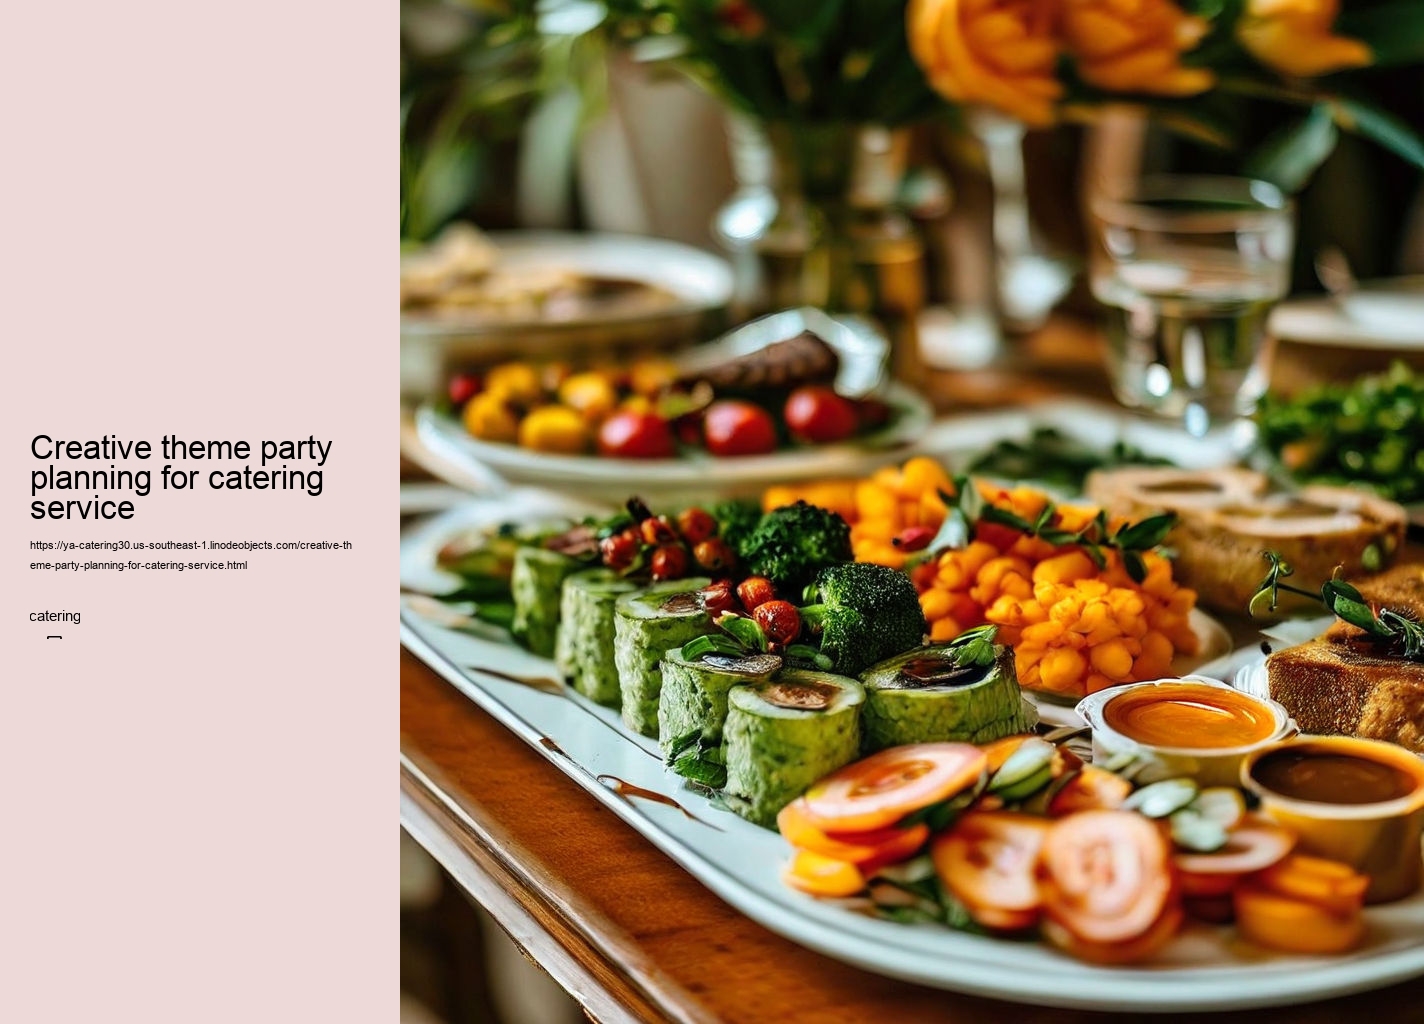 Creative theme party planning for catering service